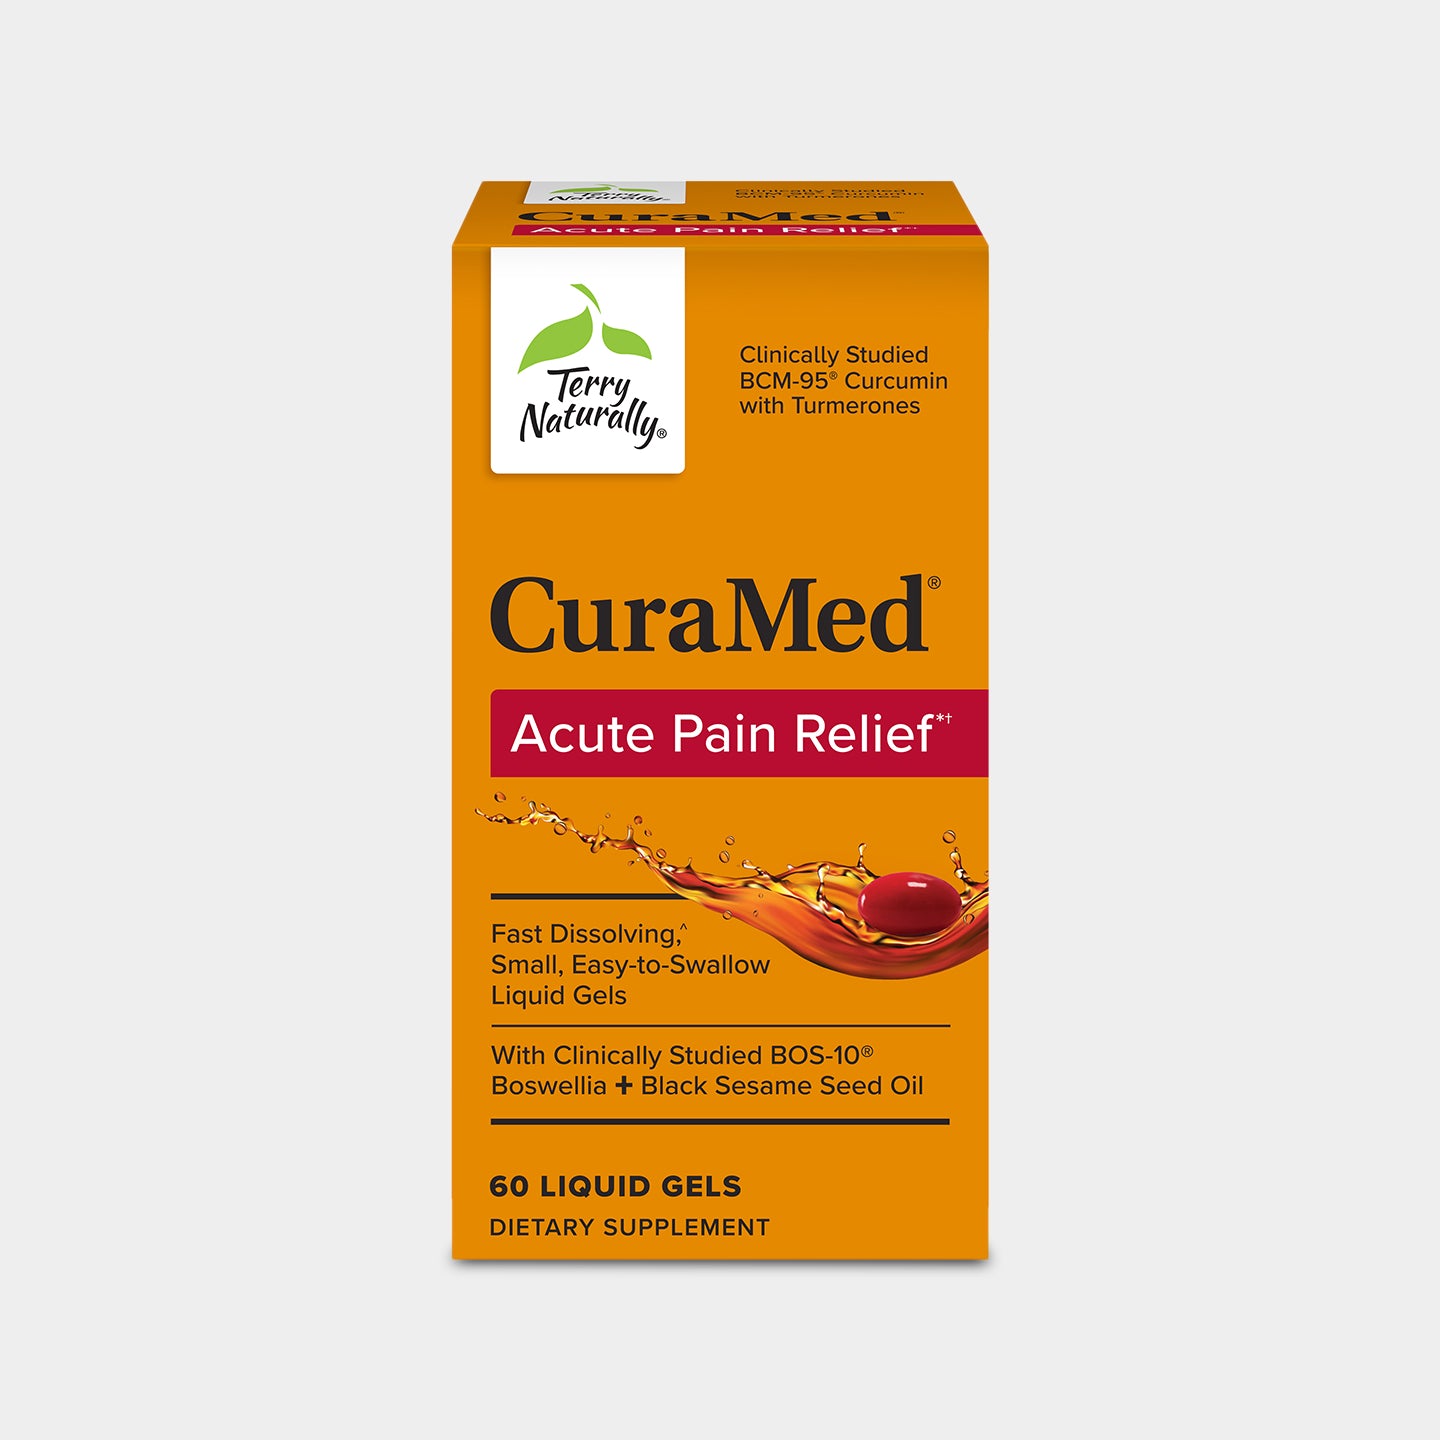 Terry Naturally CuraMed Acute Pain Relief A1